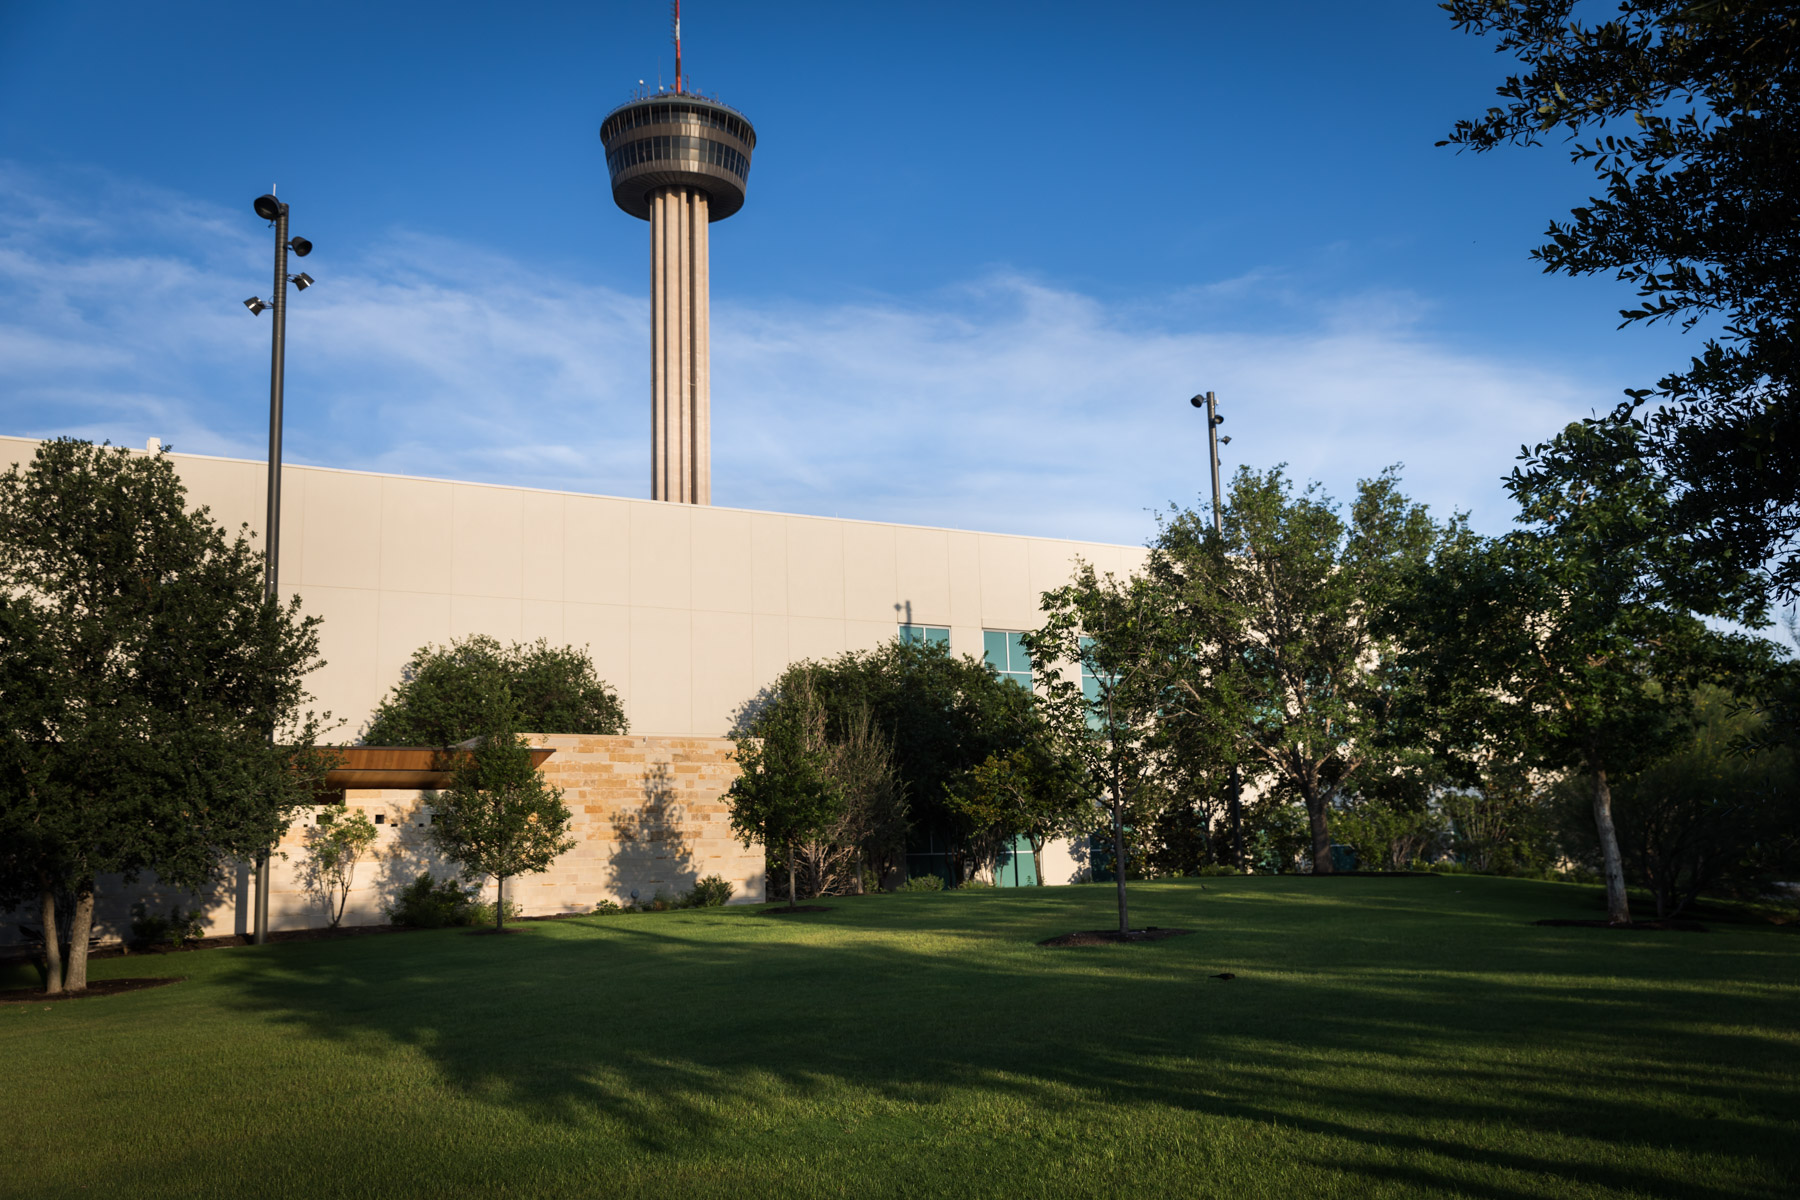 Civic Park at Hemisfair with Tower of the Americas in the background for an article on the perfect downtown San Antonio family portrait itinerary